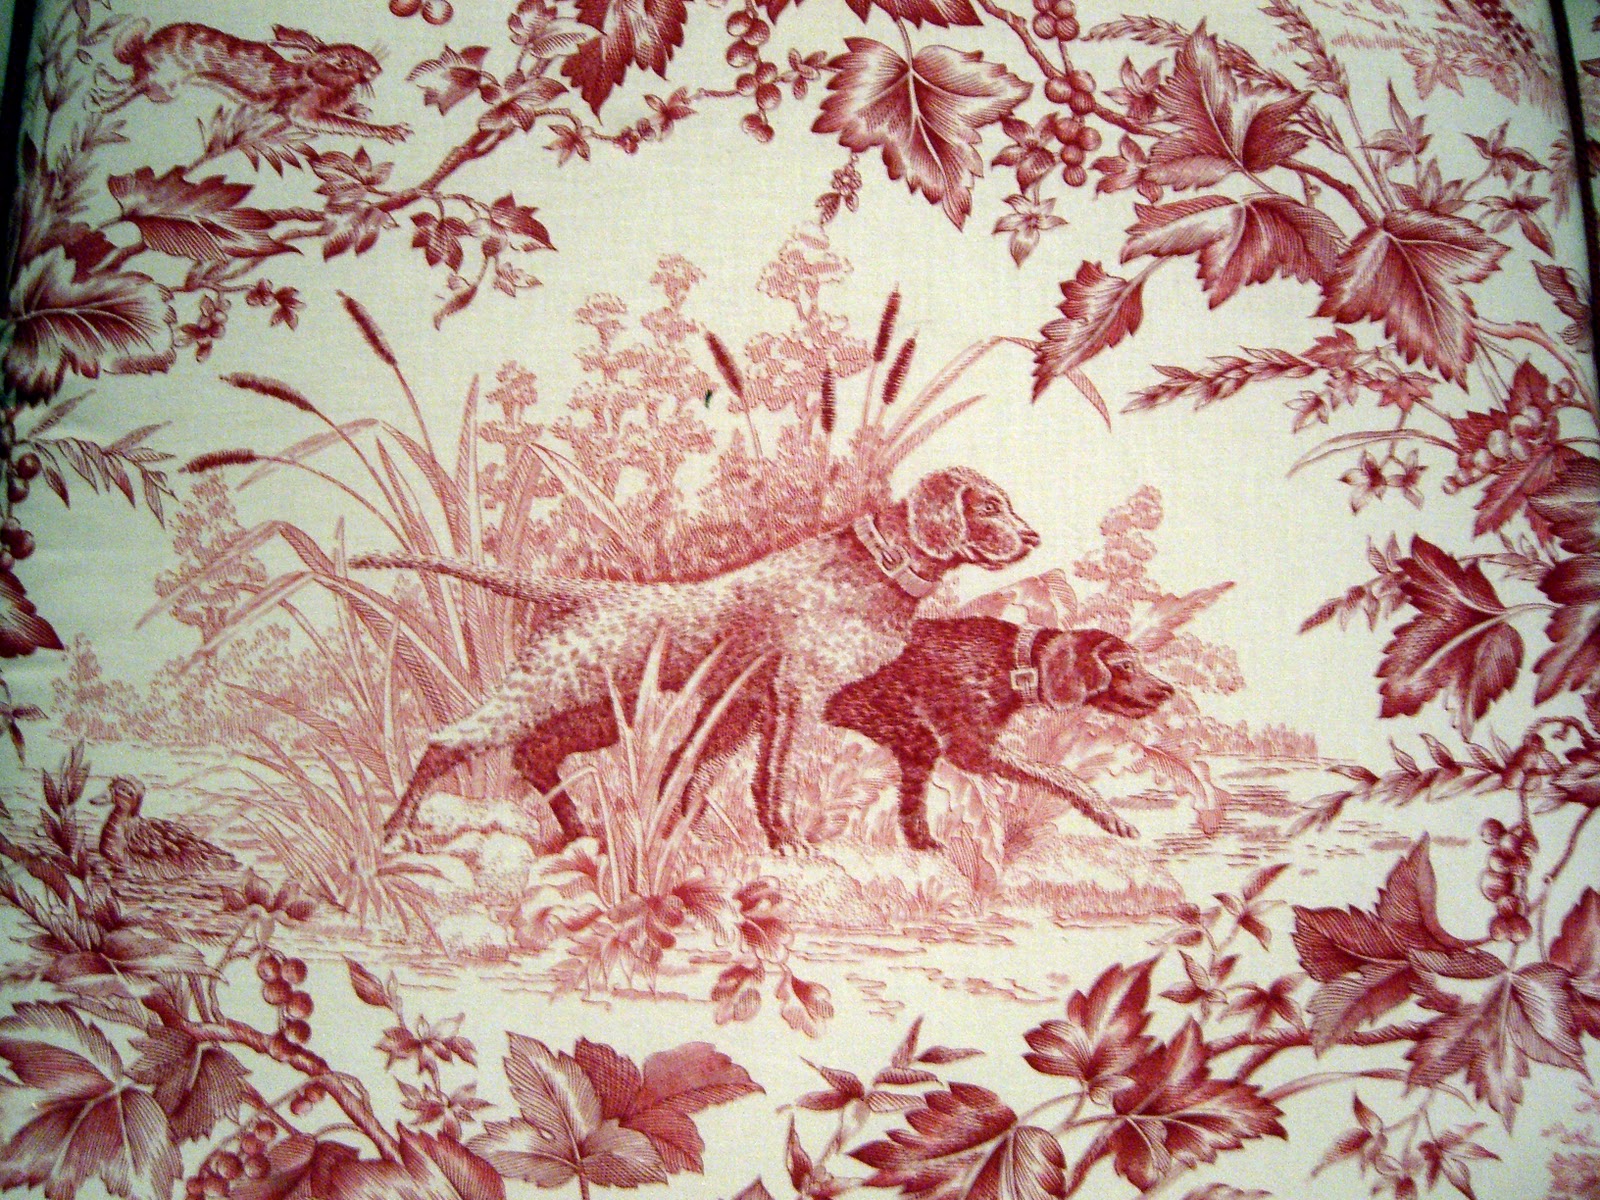  different color way it is from a red and white toile wallpaper red